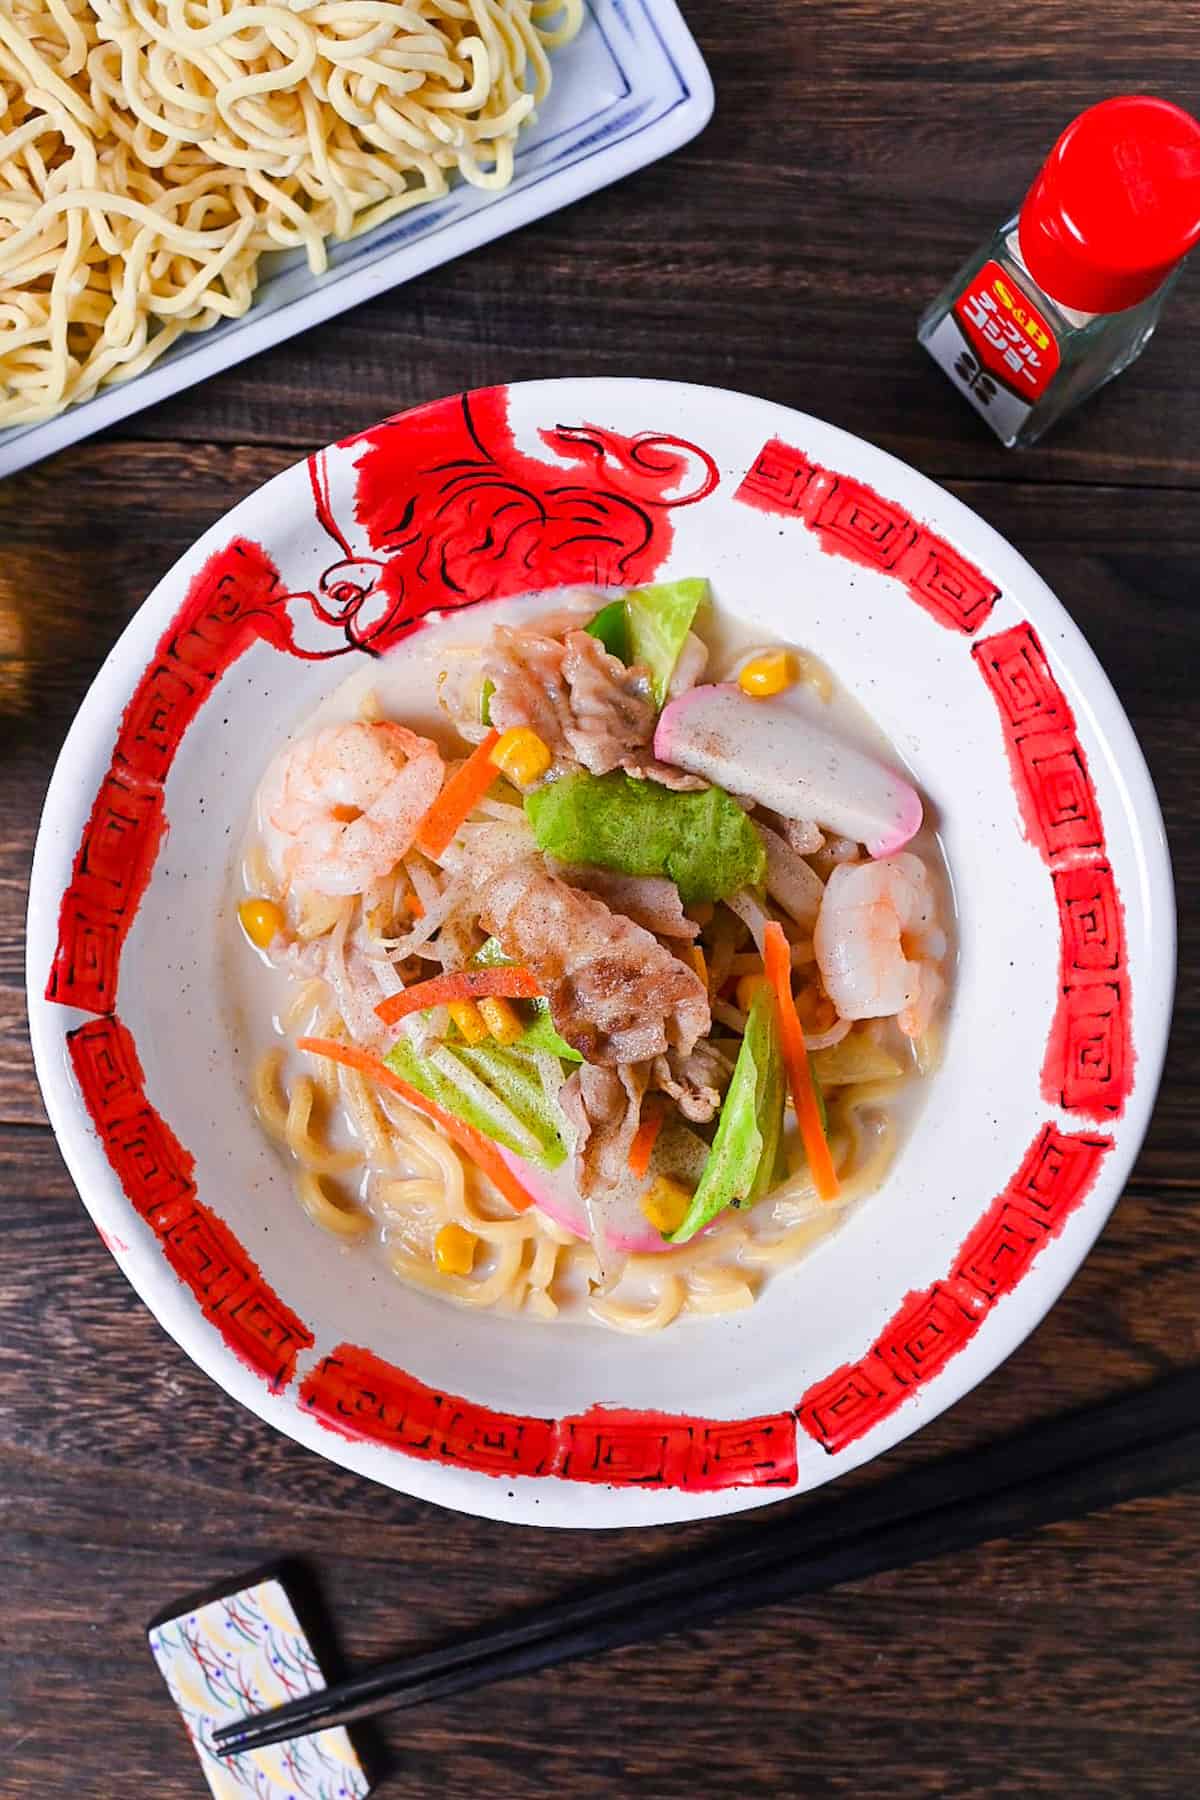 Ringer Hut Style Nagasaki Champon served in a white and red ramen bowl made with pork, shrimps and vegetables in a rich milky broth